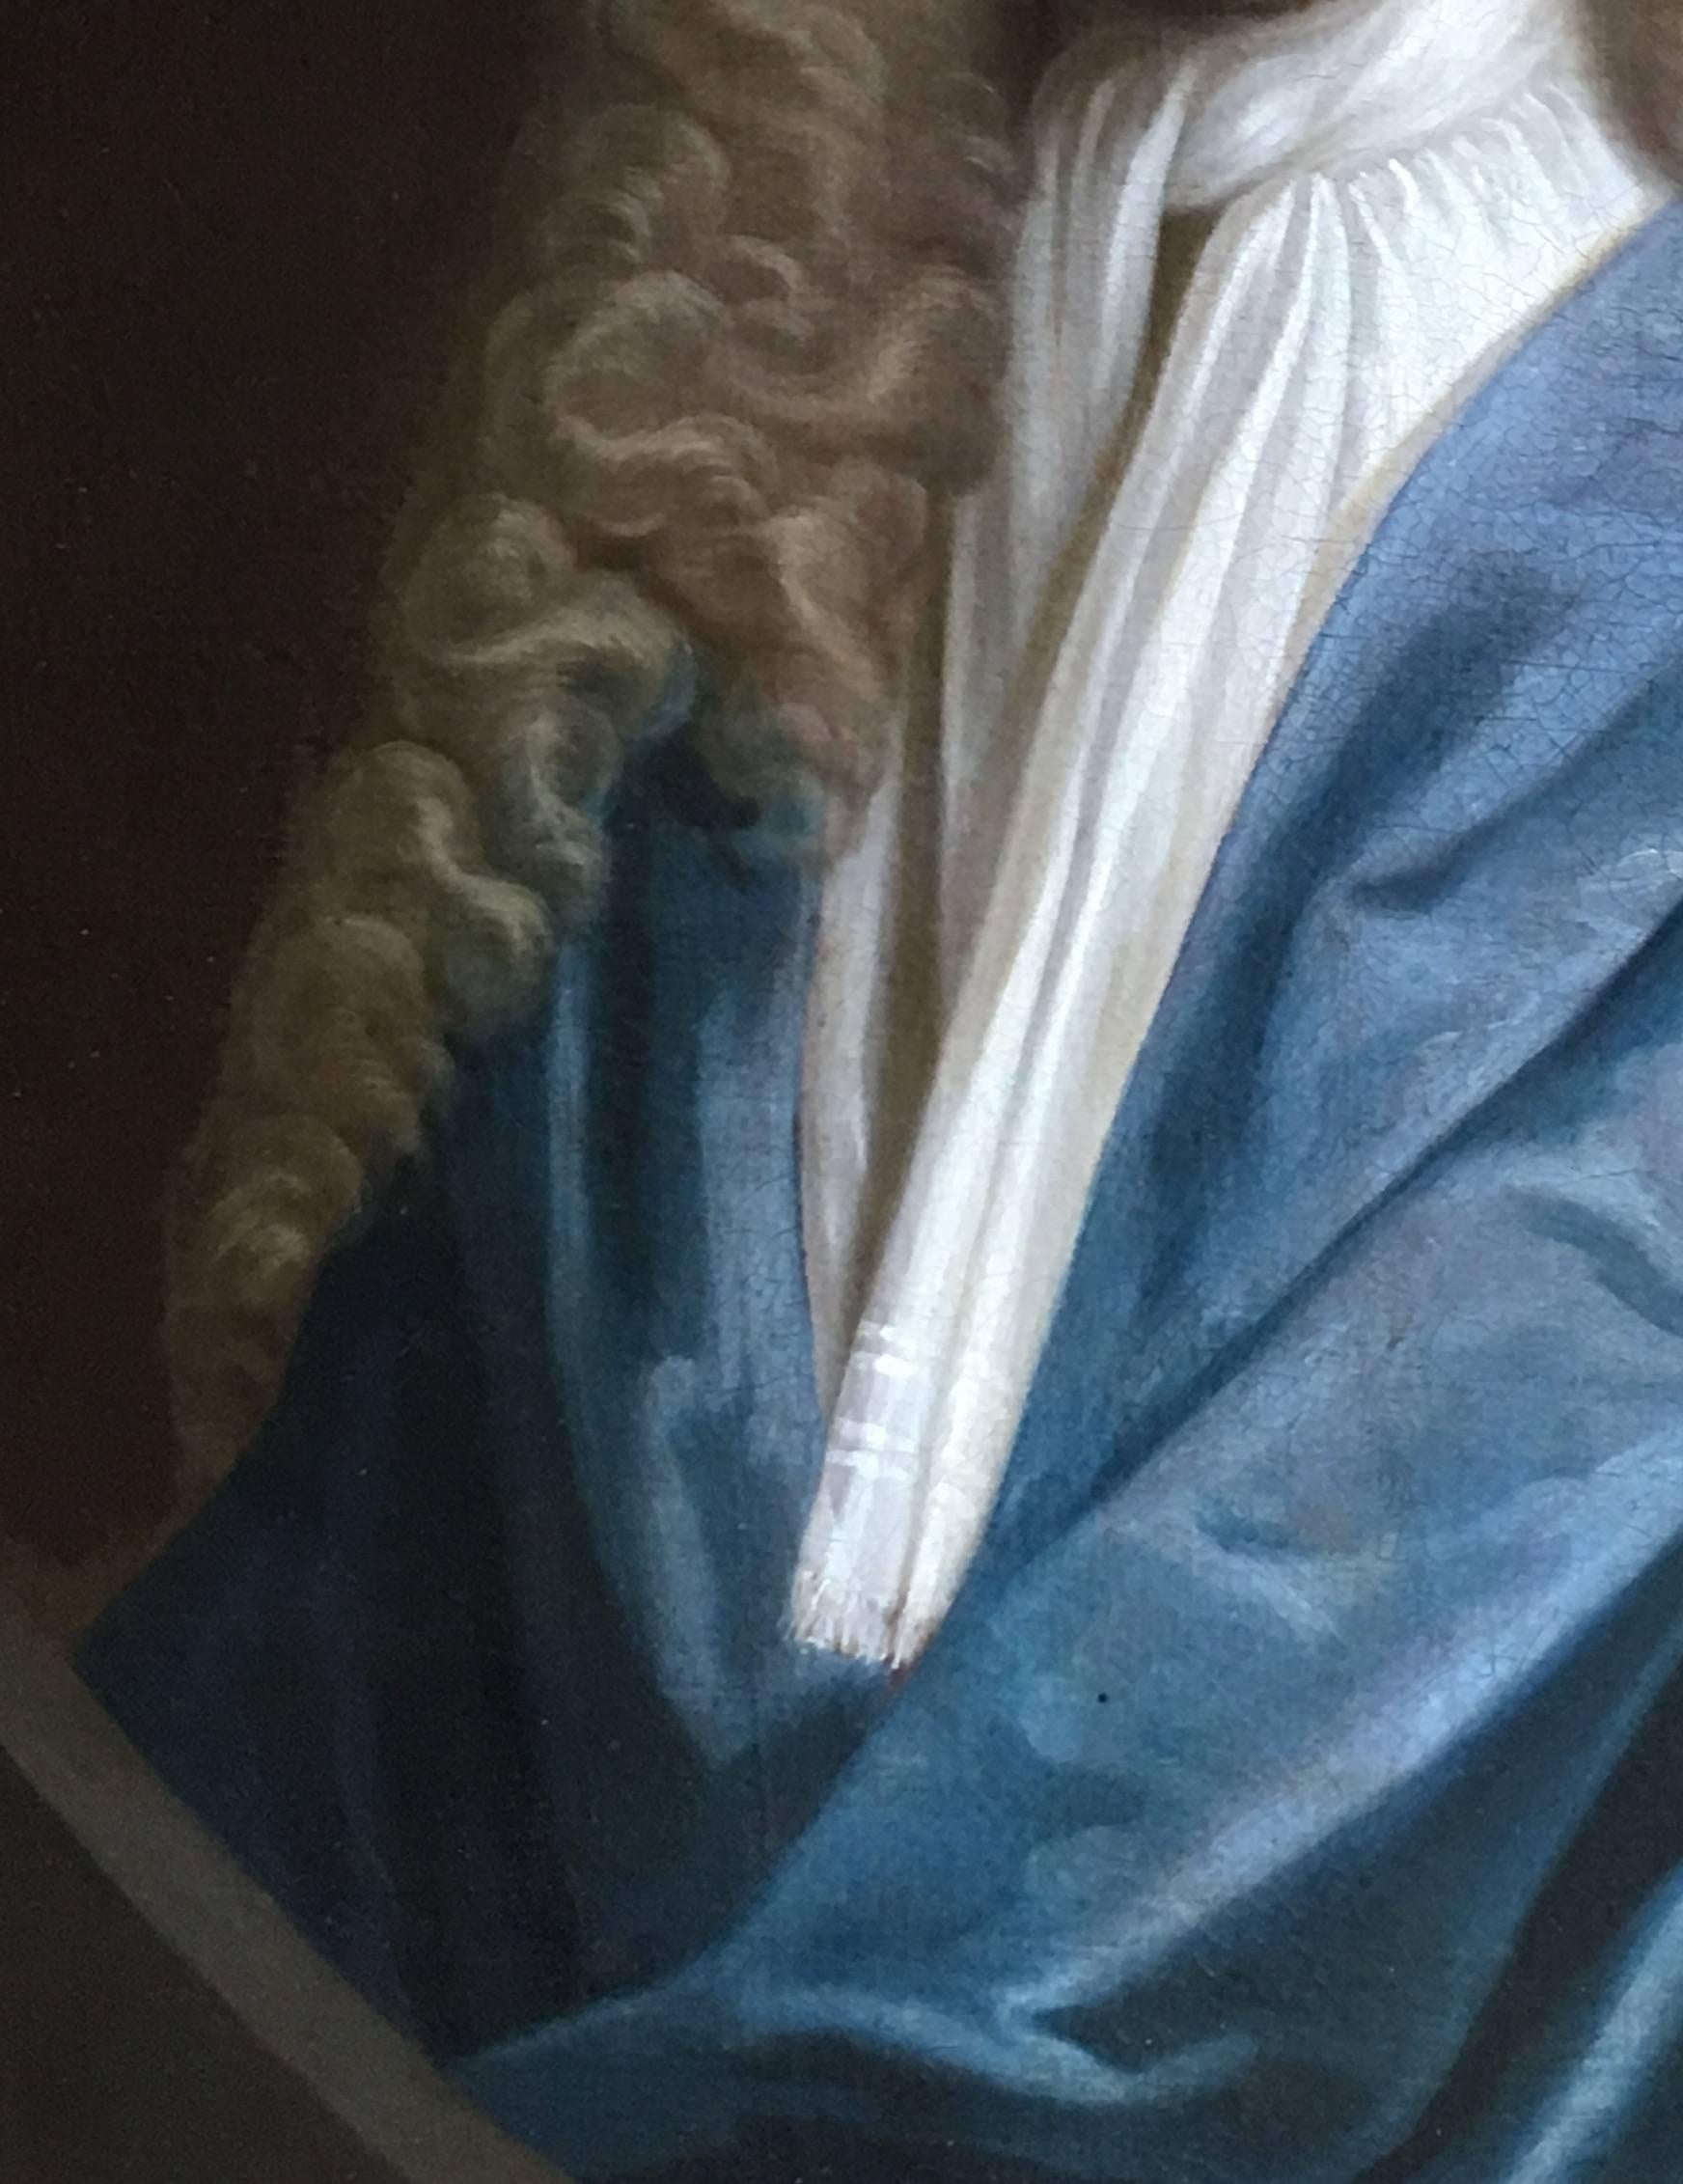 PORTRAIT OF A GENTLEMAN IN A BLUE ROBE - ATTRIBUTED TO JOHN CLOSTERMAN. - Painting by John Closterman